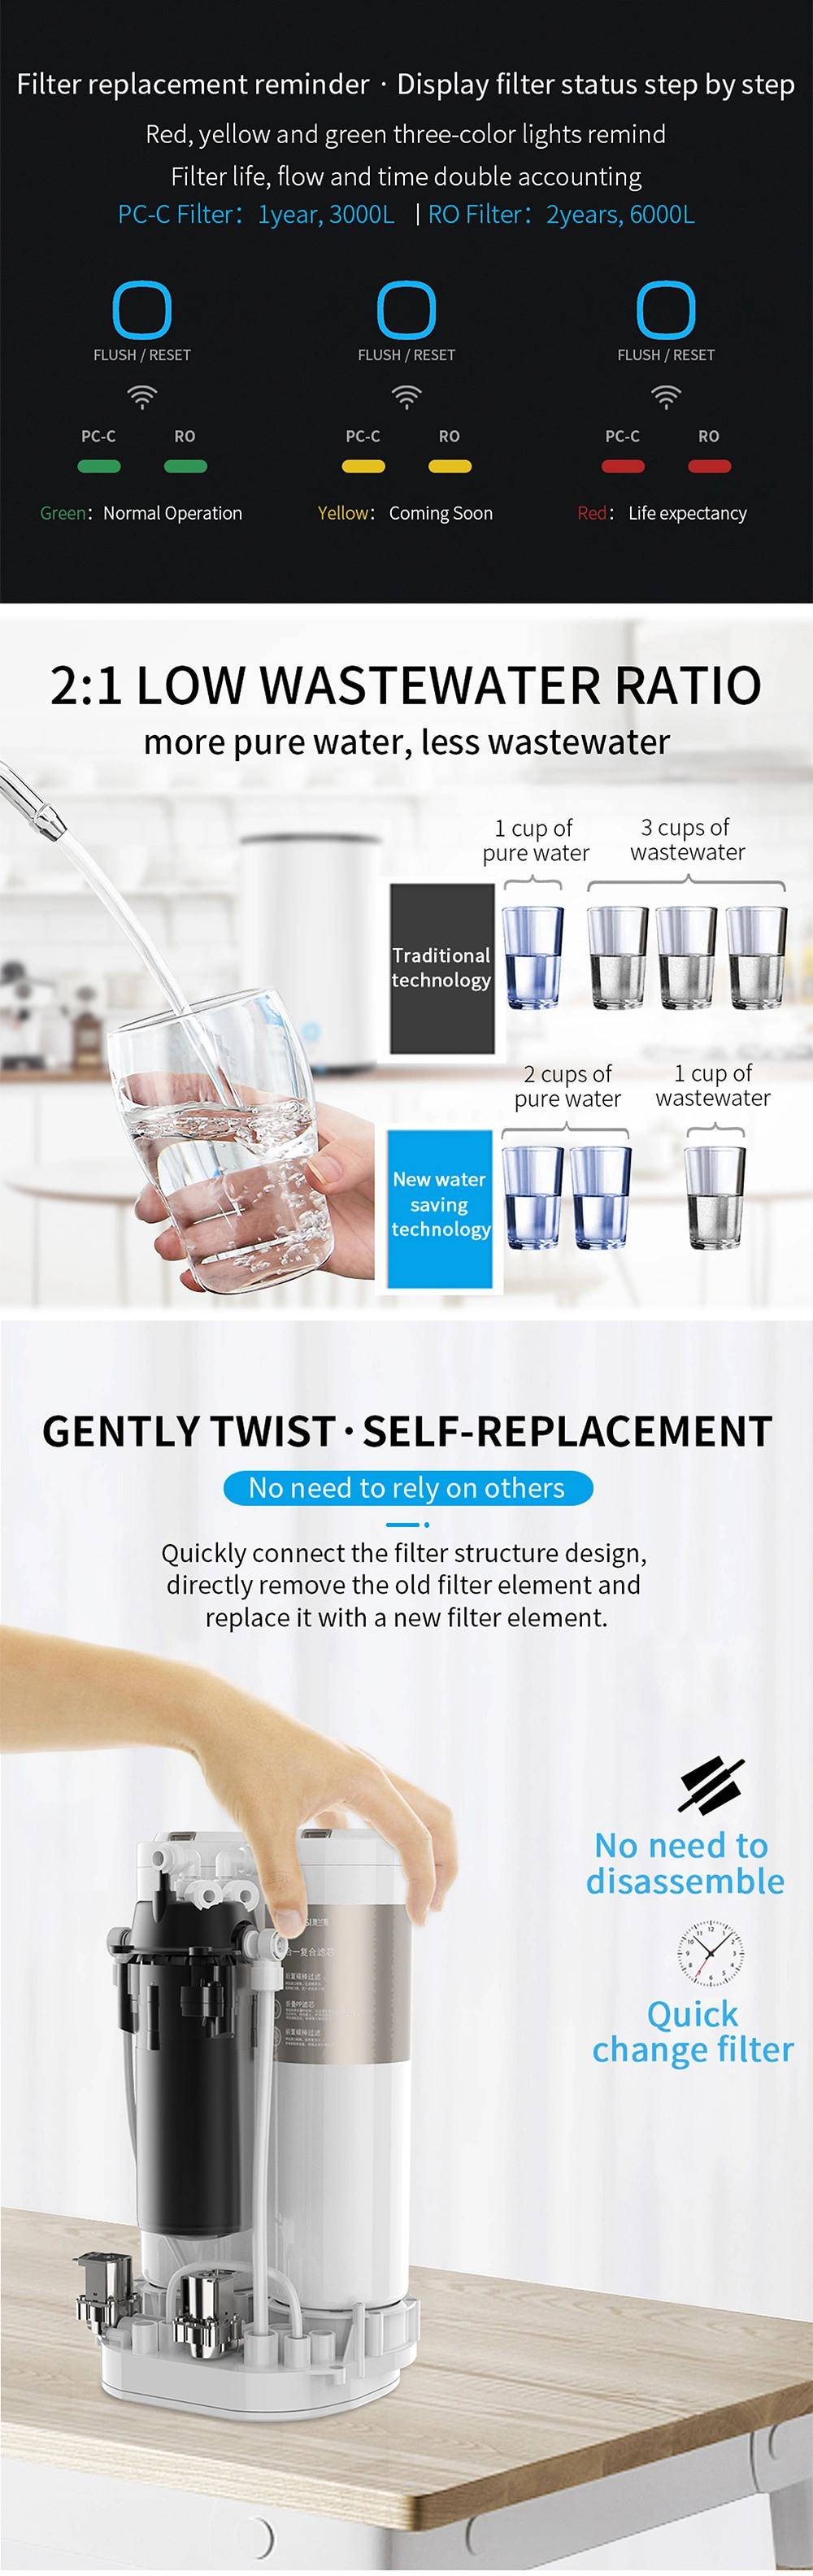 OEM Smart Water Purifier RO with WiFi Tap Water Drink Purifier Reverse Osmosis Water Filter System